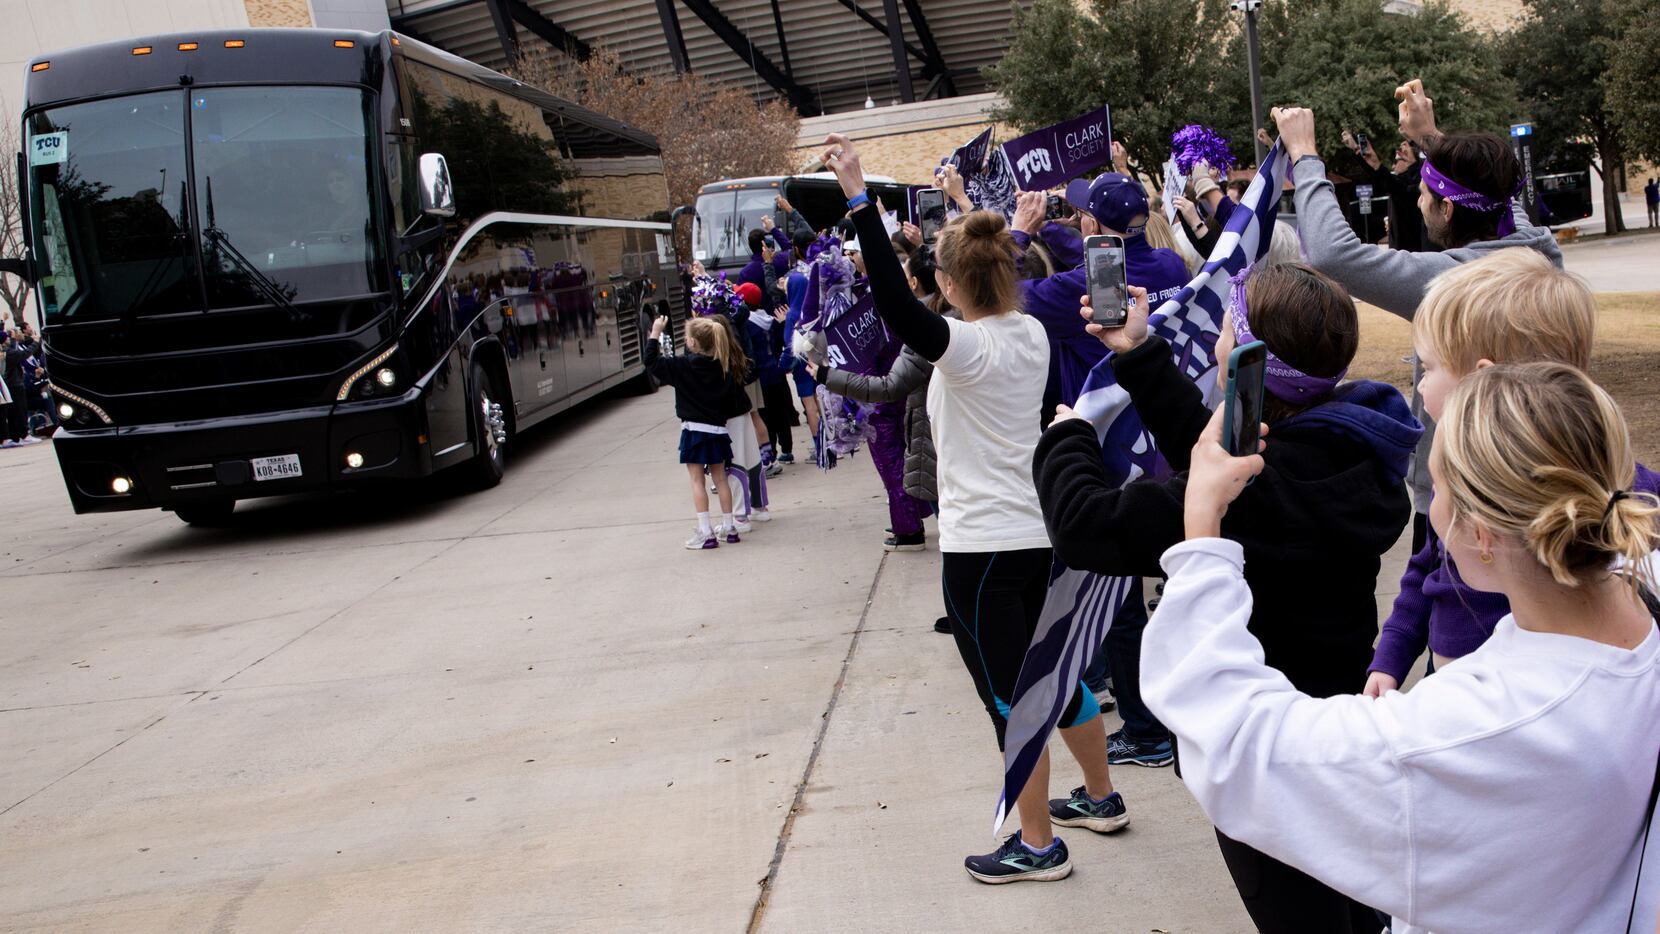 TCU Horned Frogs fans cheer as football players, coaches and support staff leave on charter...